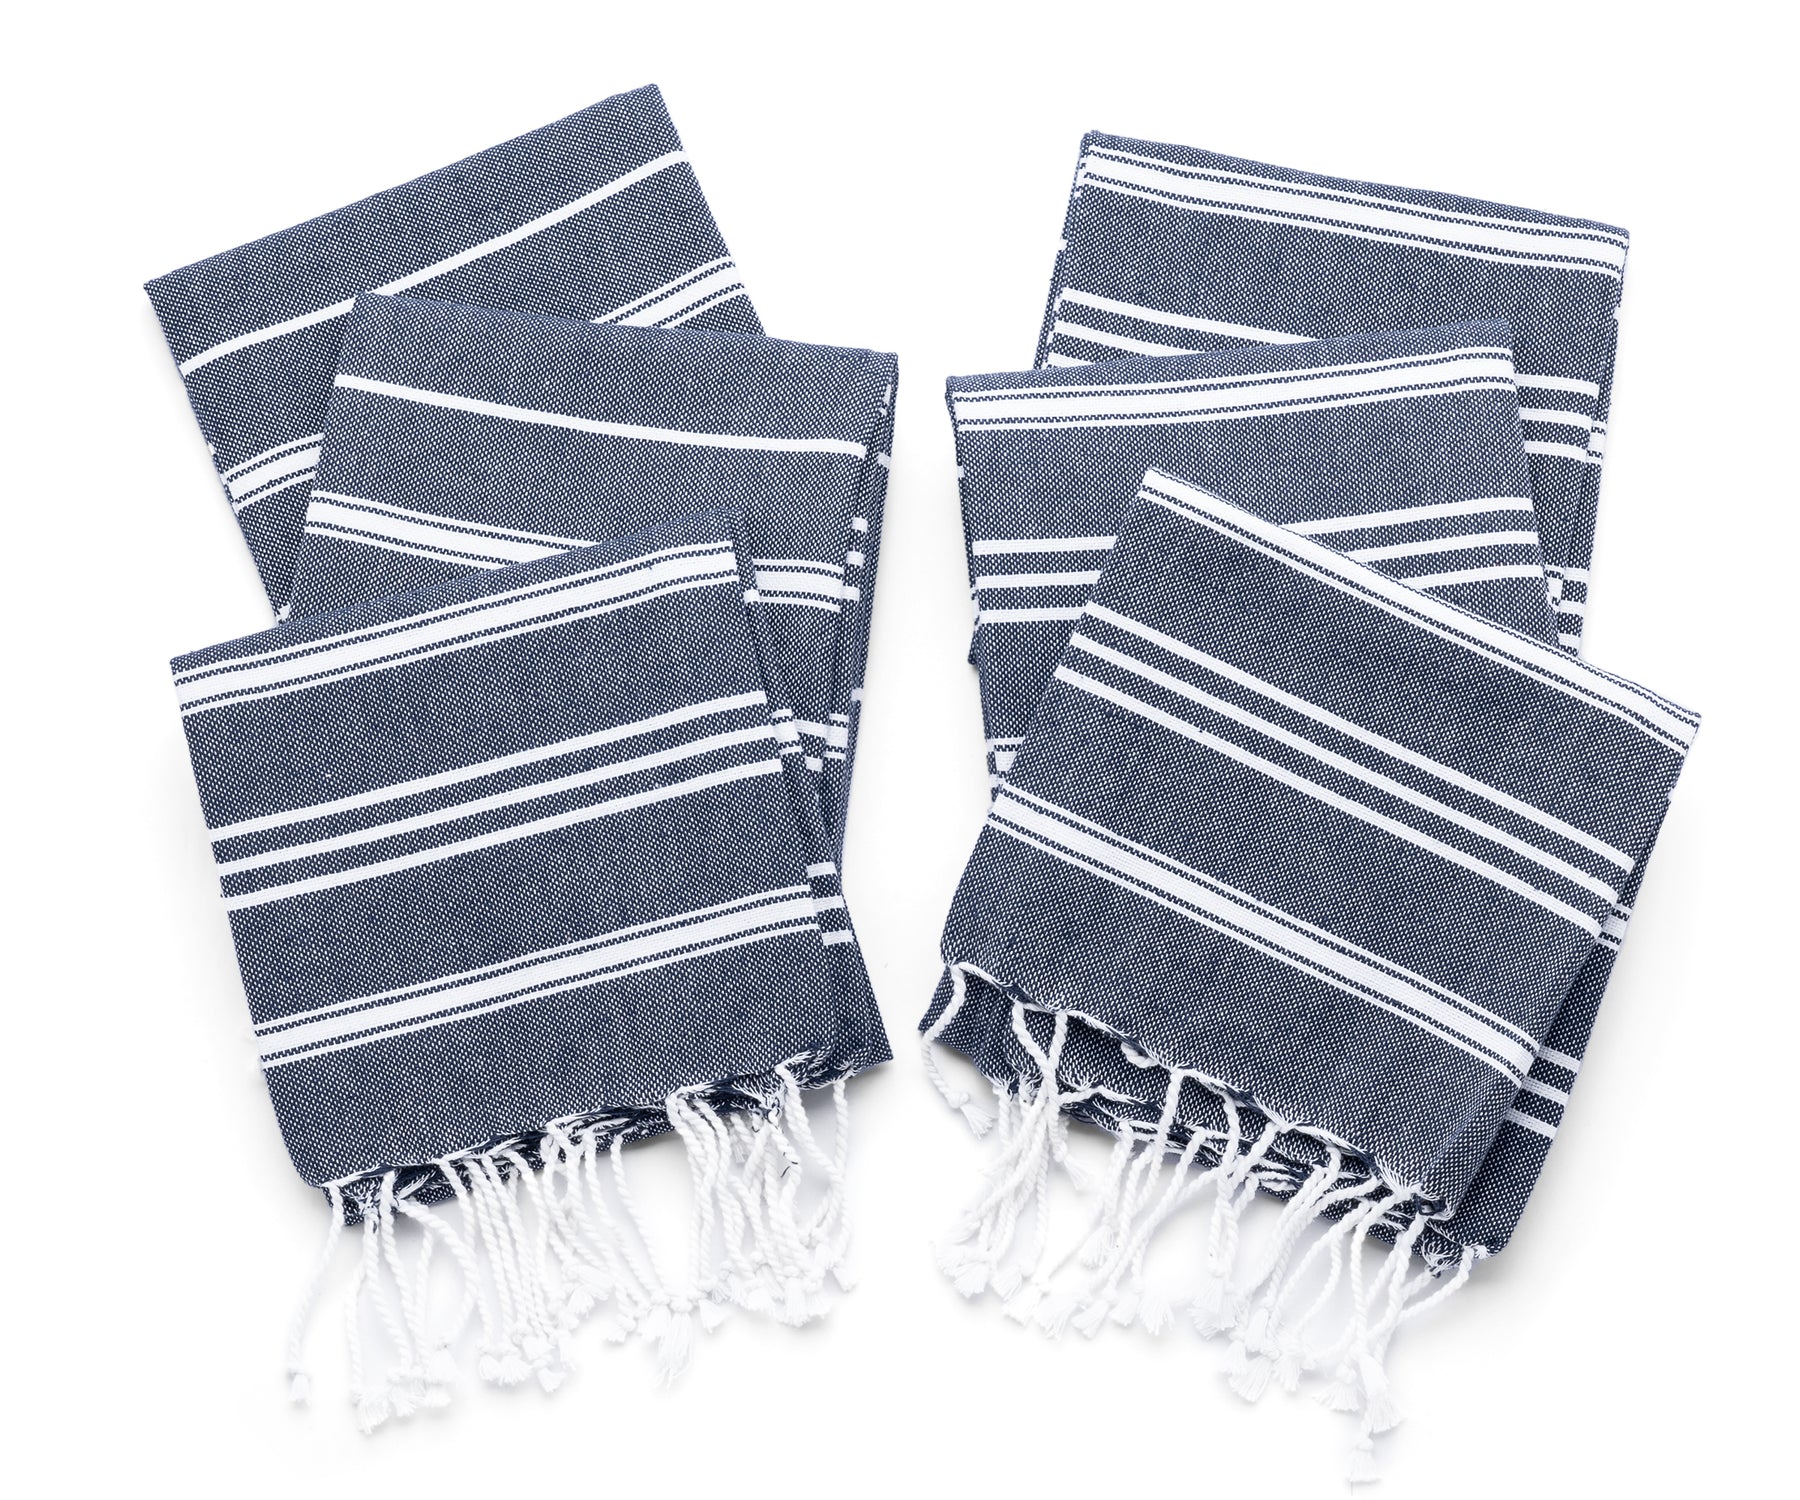 Kitchen Towels, Set of 3, Large Premium Cotton, Modern Blue Stripes, 20x30,  100% Strongly Woven Cotton, Absorbent, Hanging Loop 